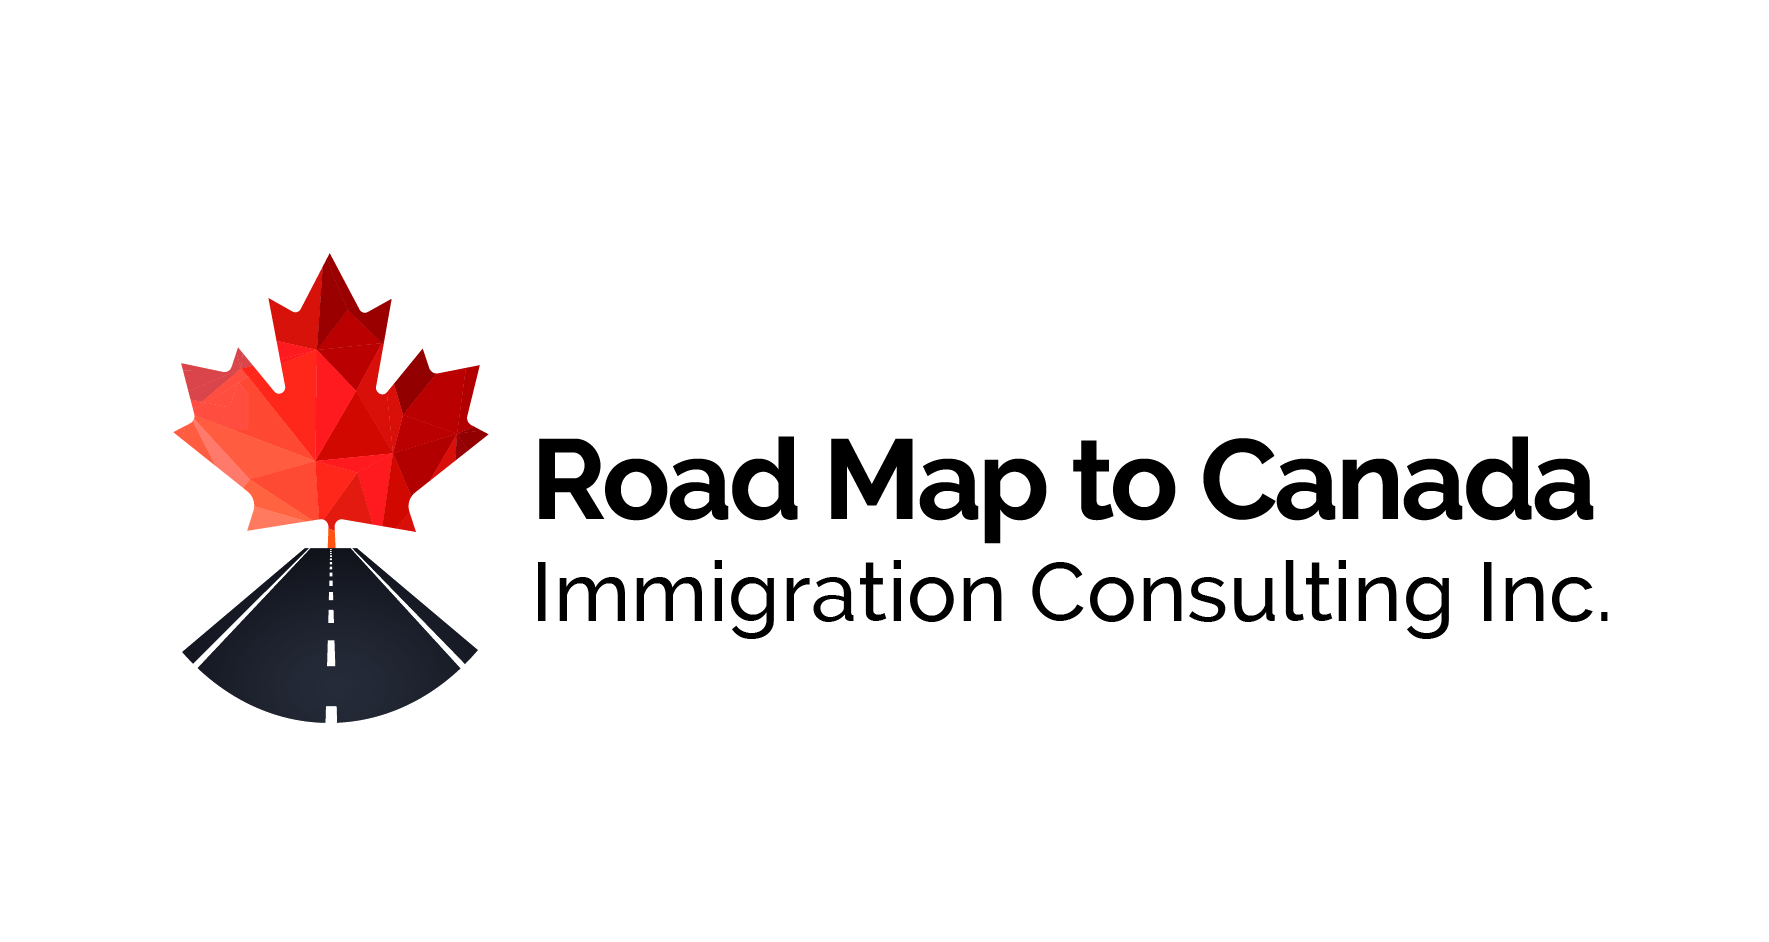 Road Map to Canada Immigration Consulting Inc.